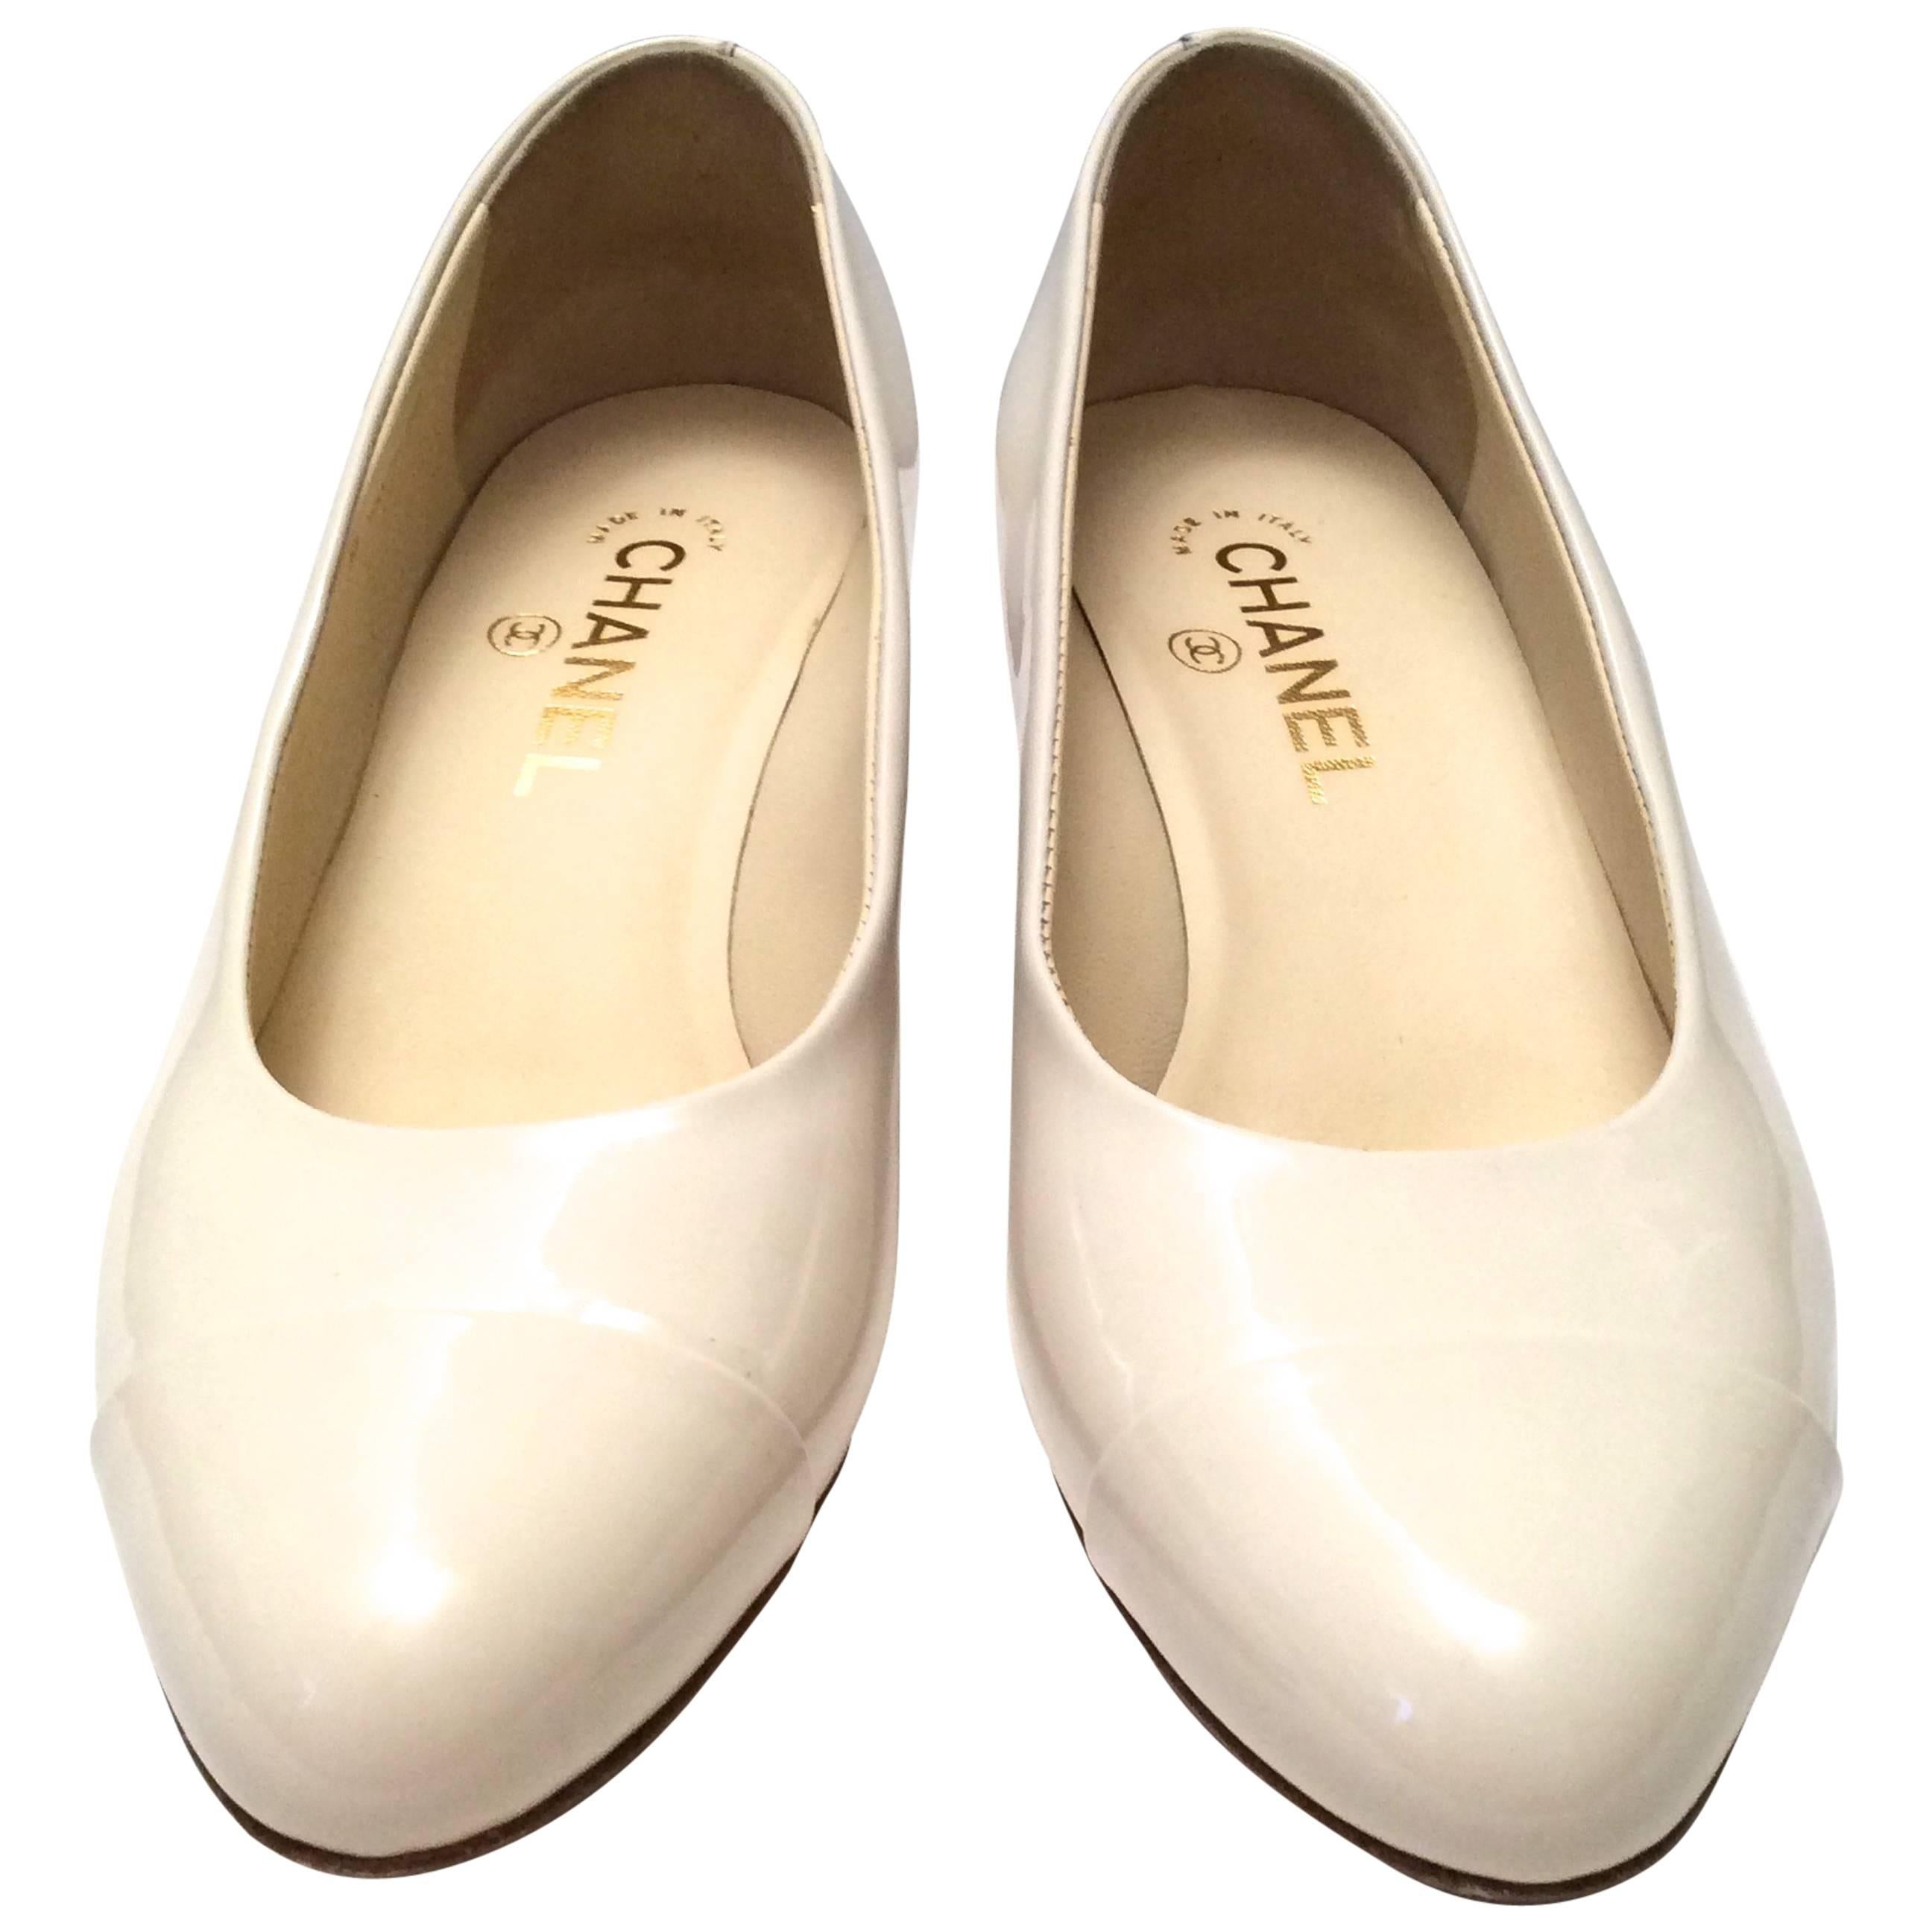 These gorgeous pumps from Chanel are a magnificent example of the simplicity and the artistry in the design of a Chanel shoe. They are patent leather in a cream white tone with embossed flowers around the exterior of the heel. There is a gold tone